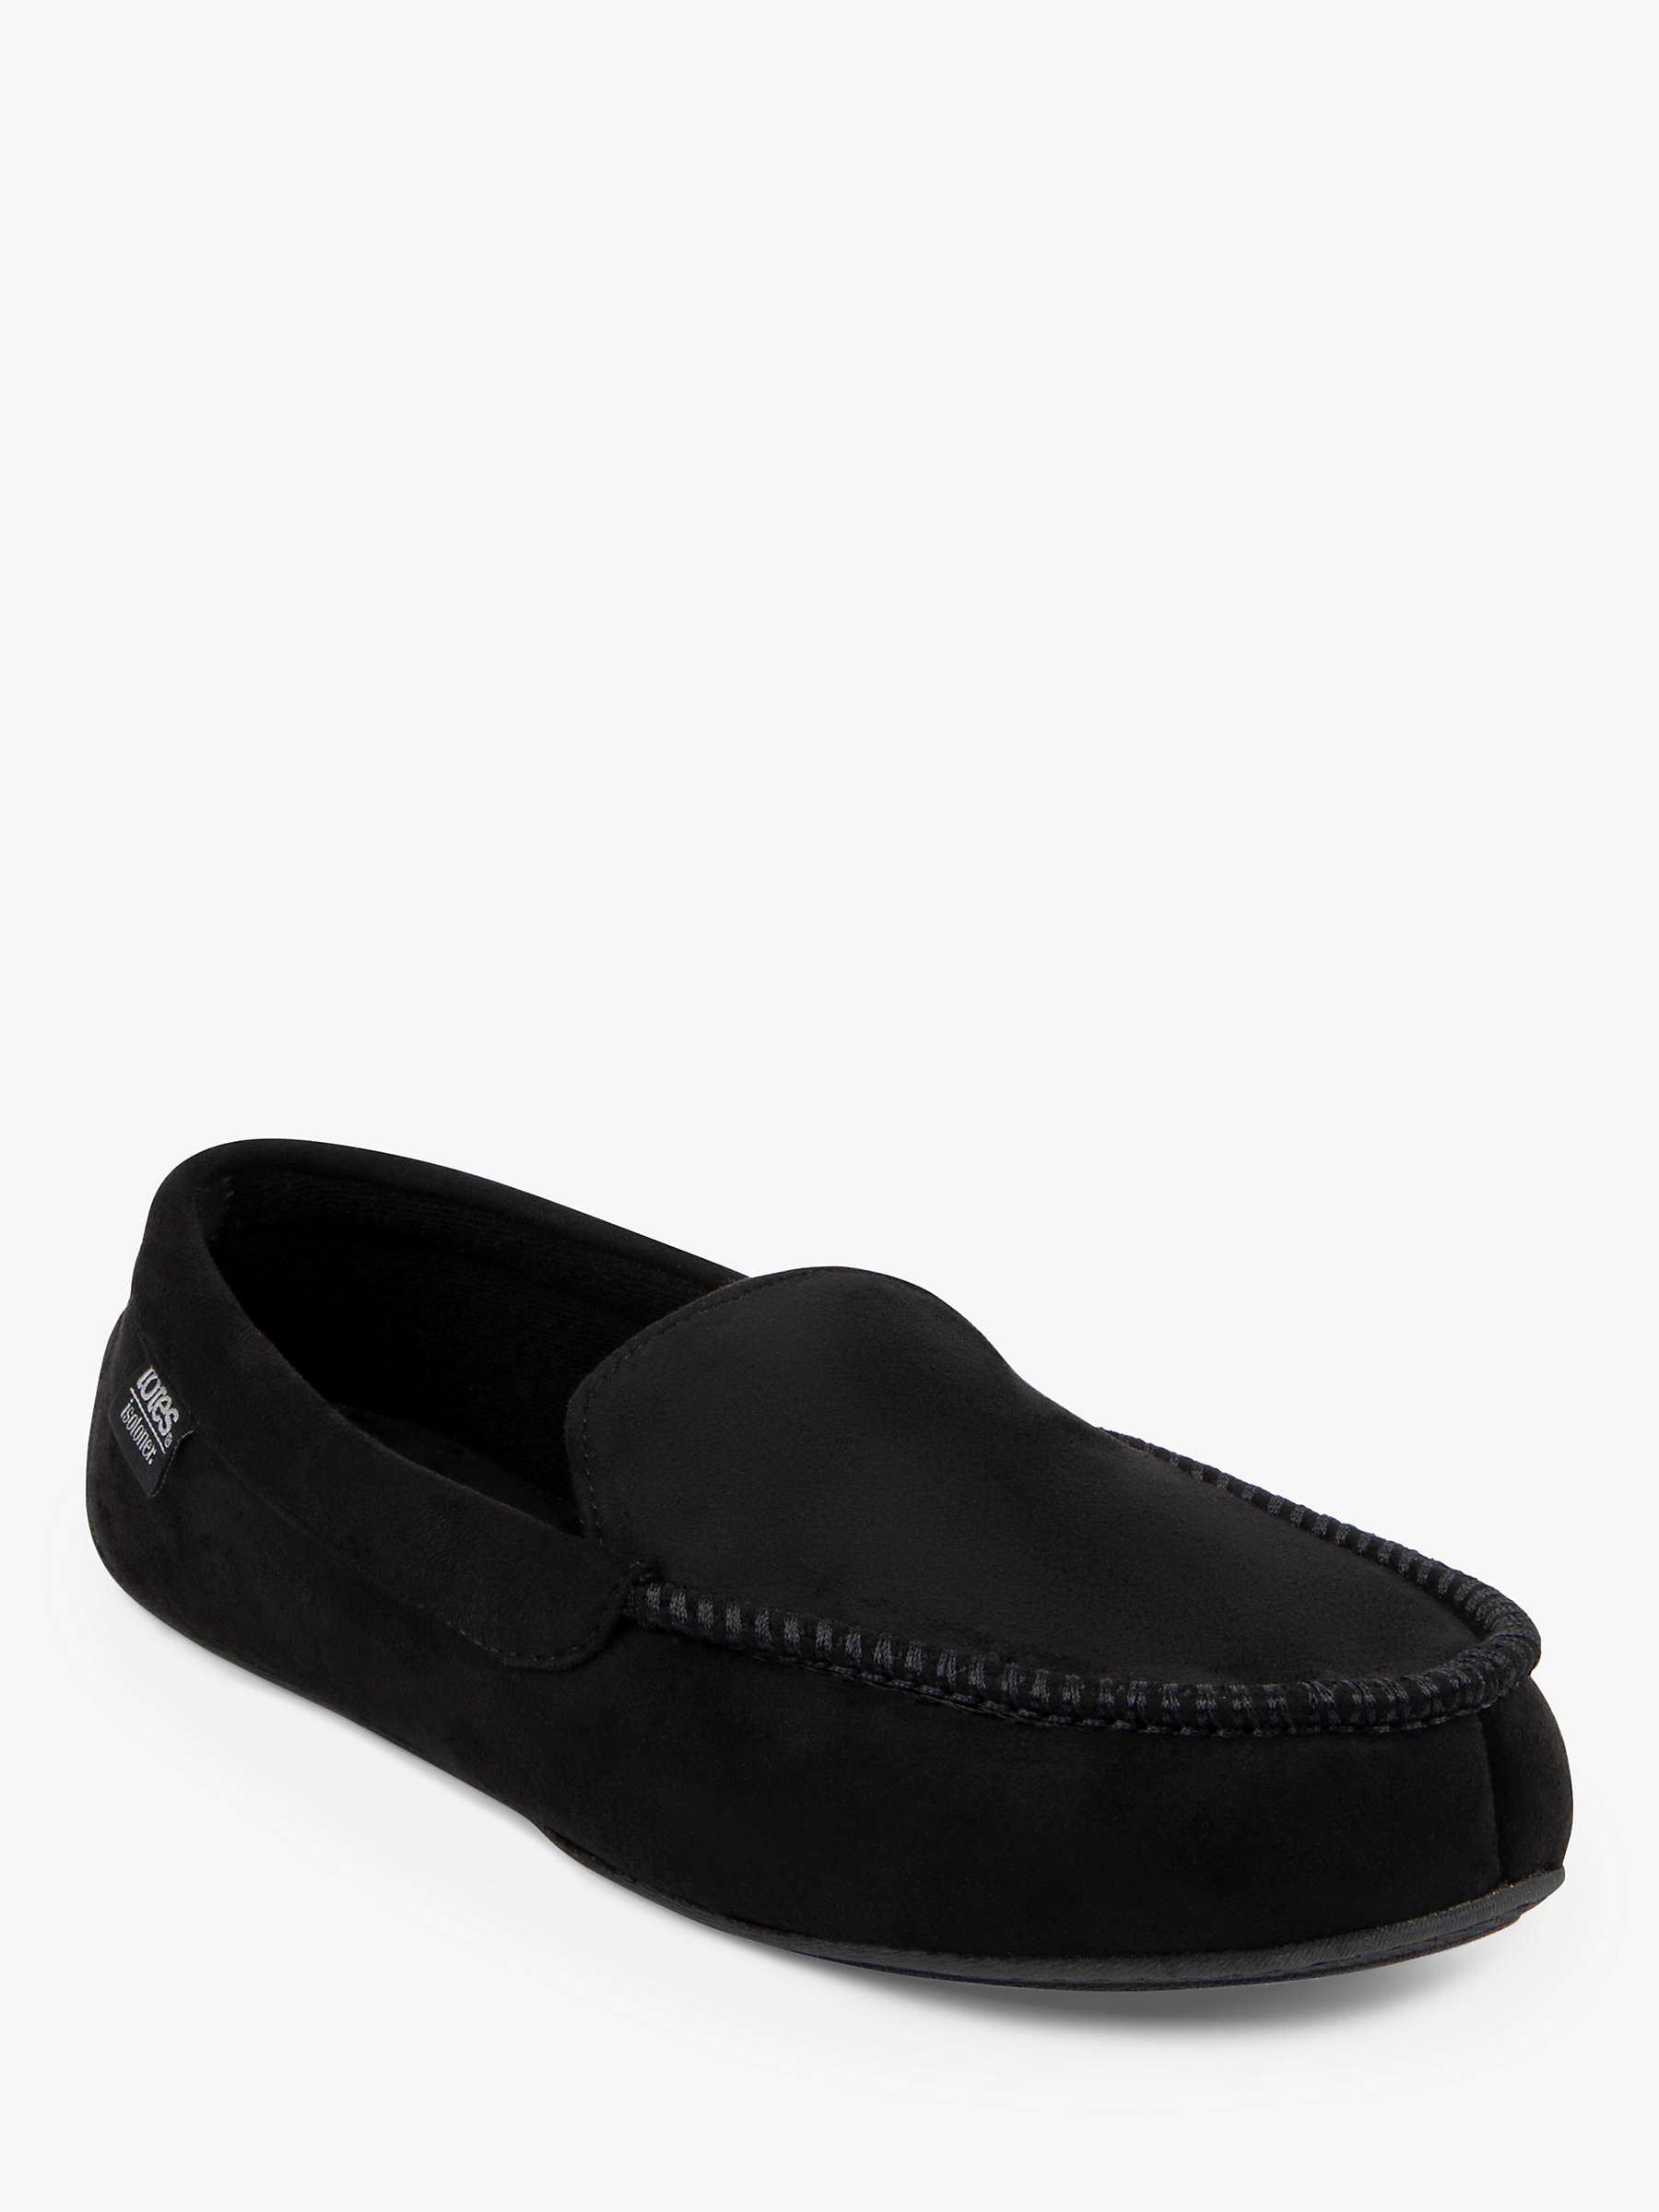 Buy totes Pillowstep Driving Moccasin Slippers Online at johnlewis.com